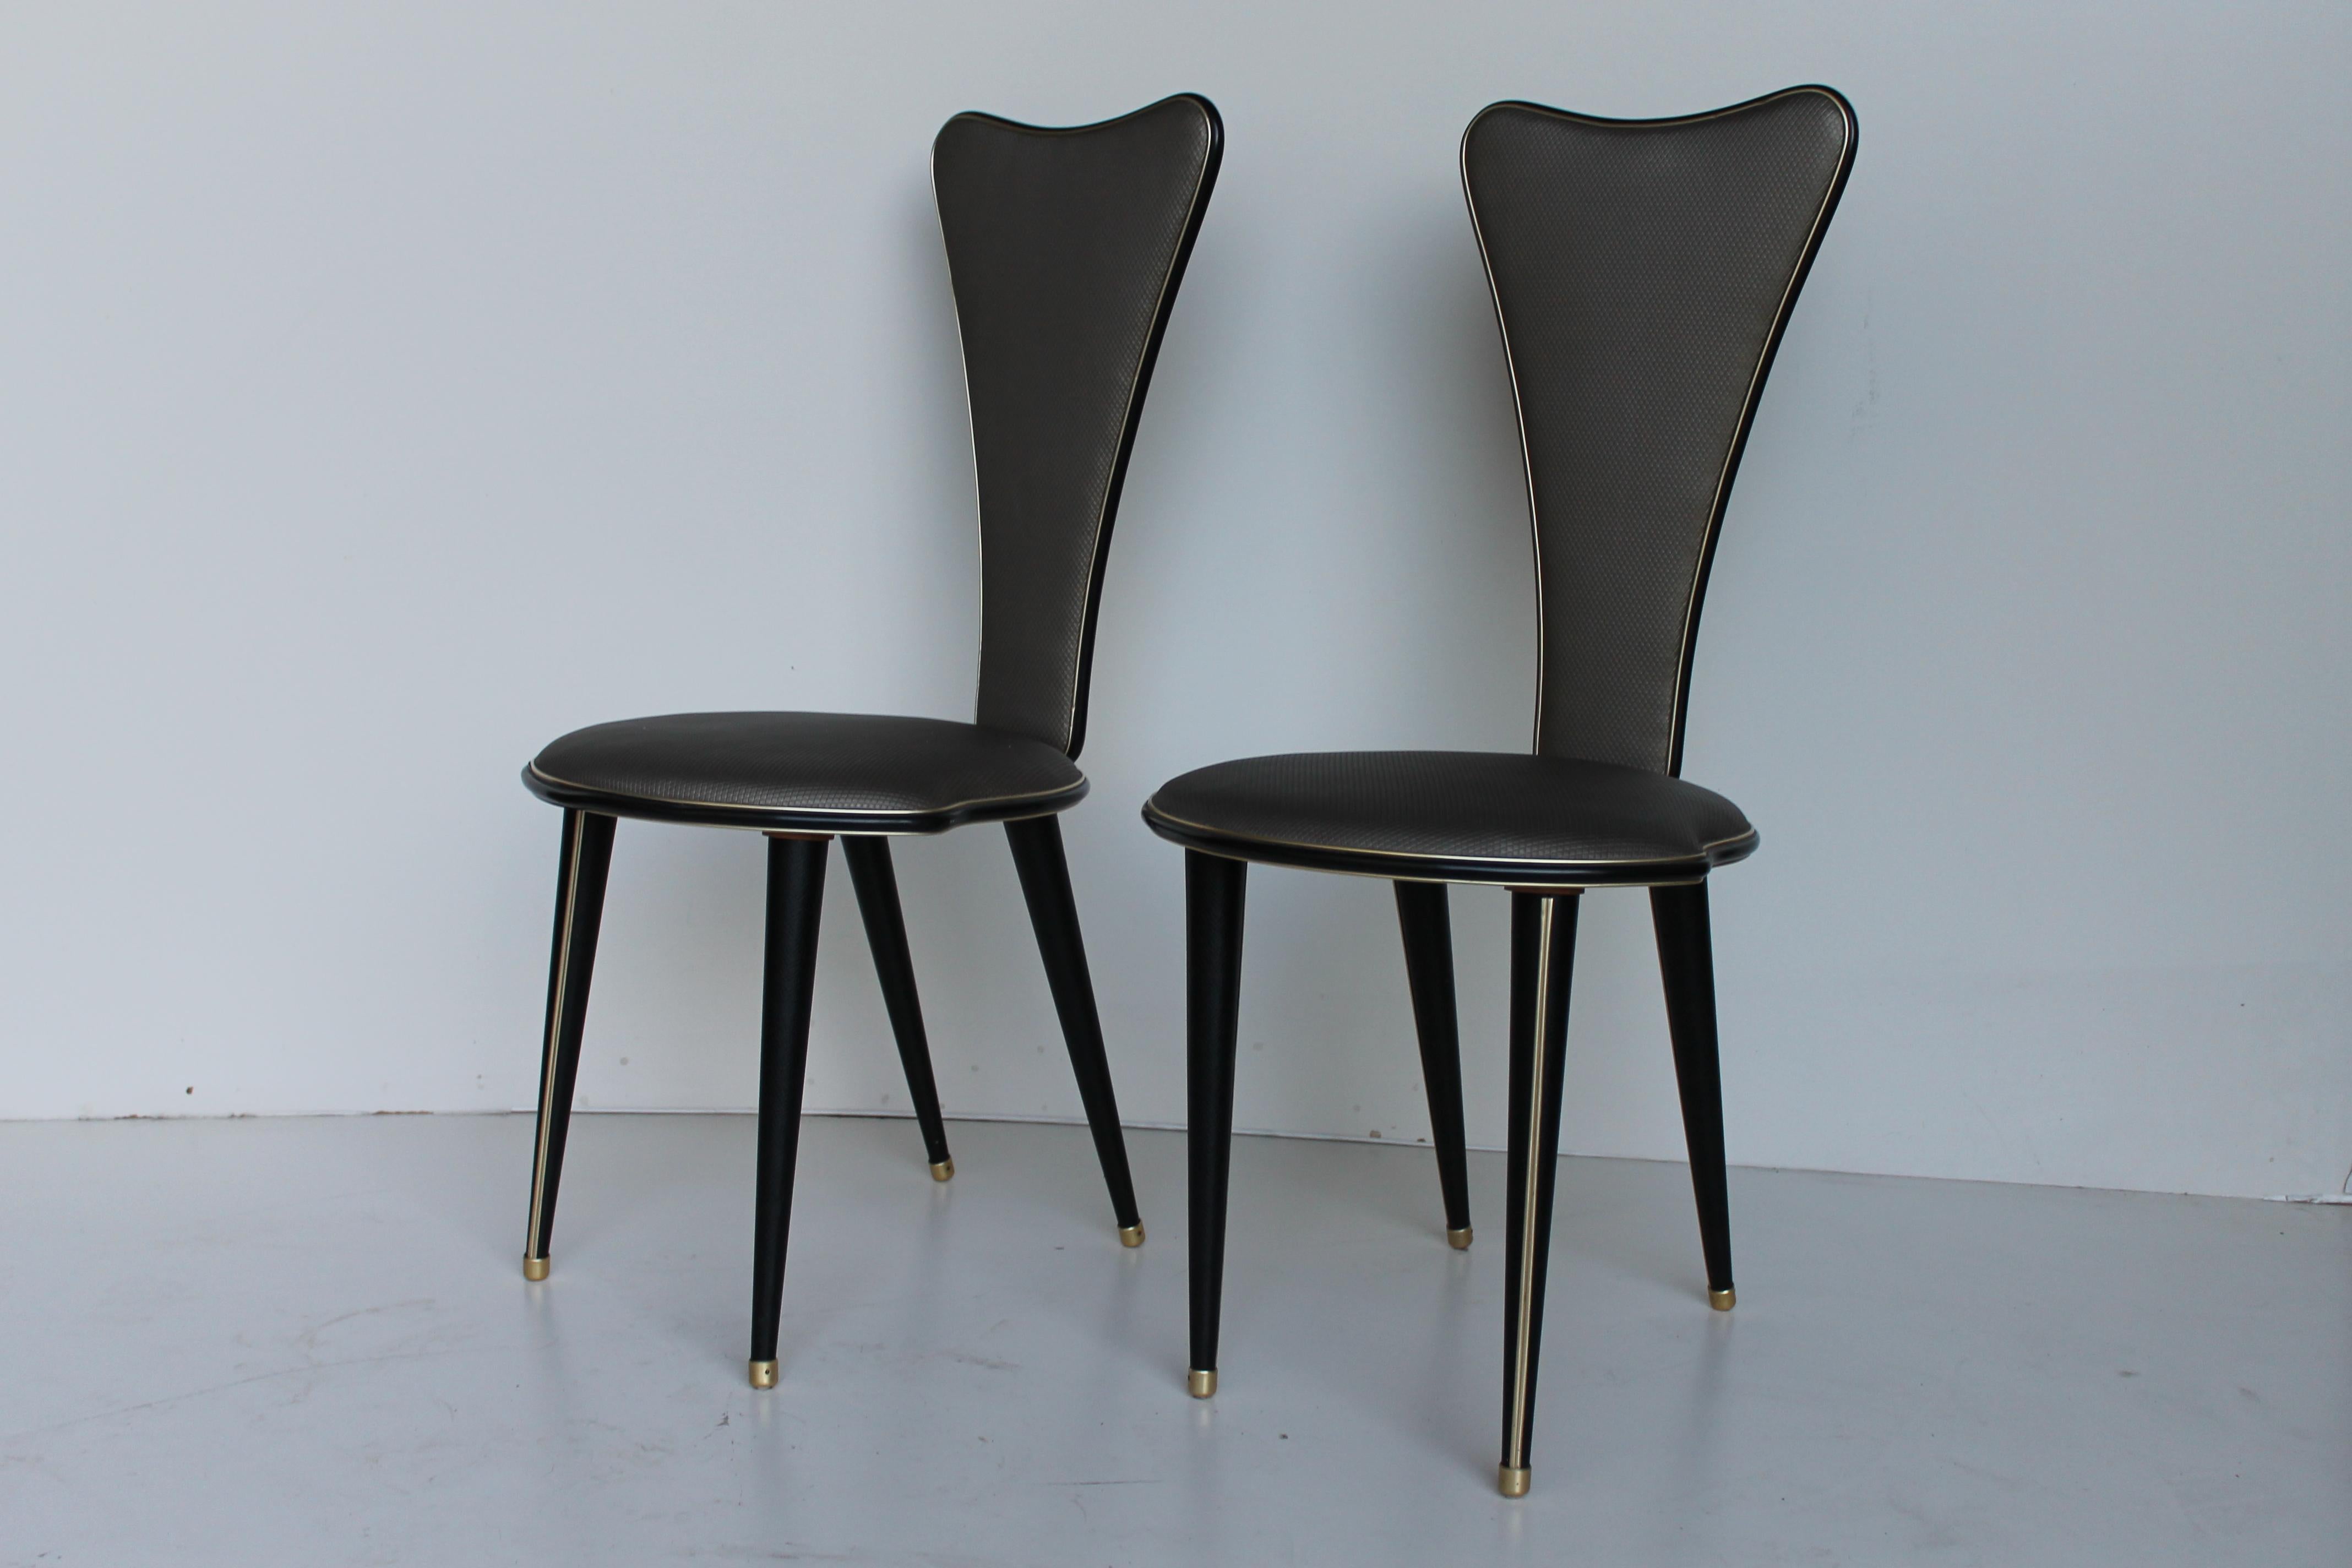 Four Umberto Mascagni Chairs, Harrods Series In Excellent Condition For Sale In Sacile, PN